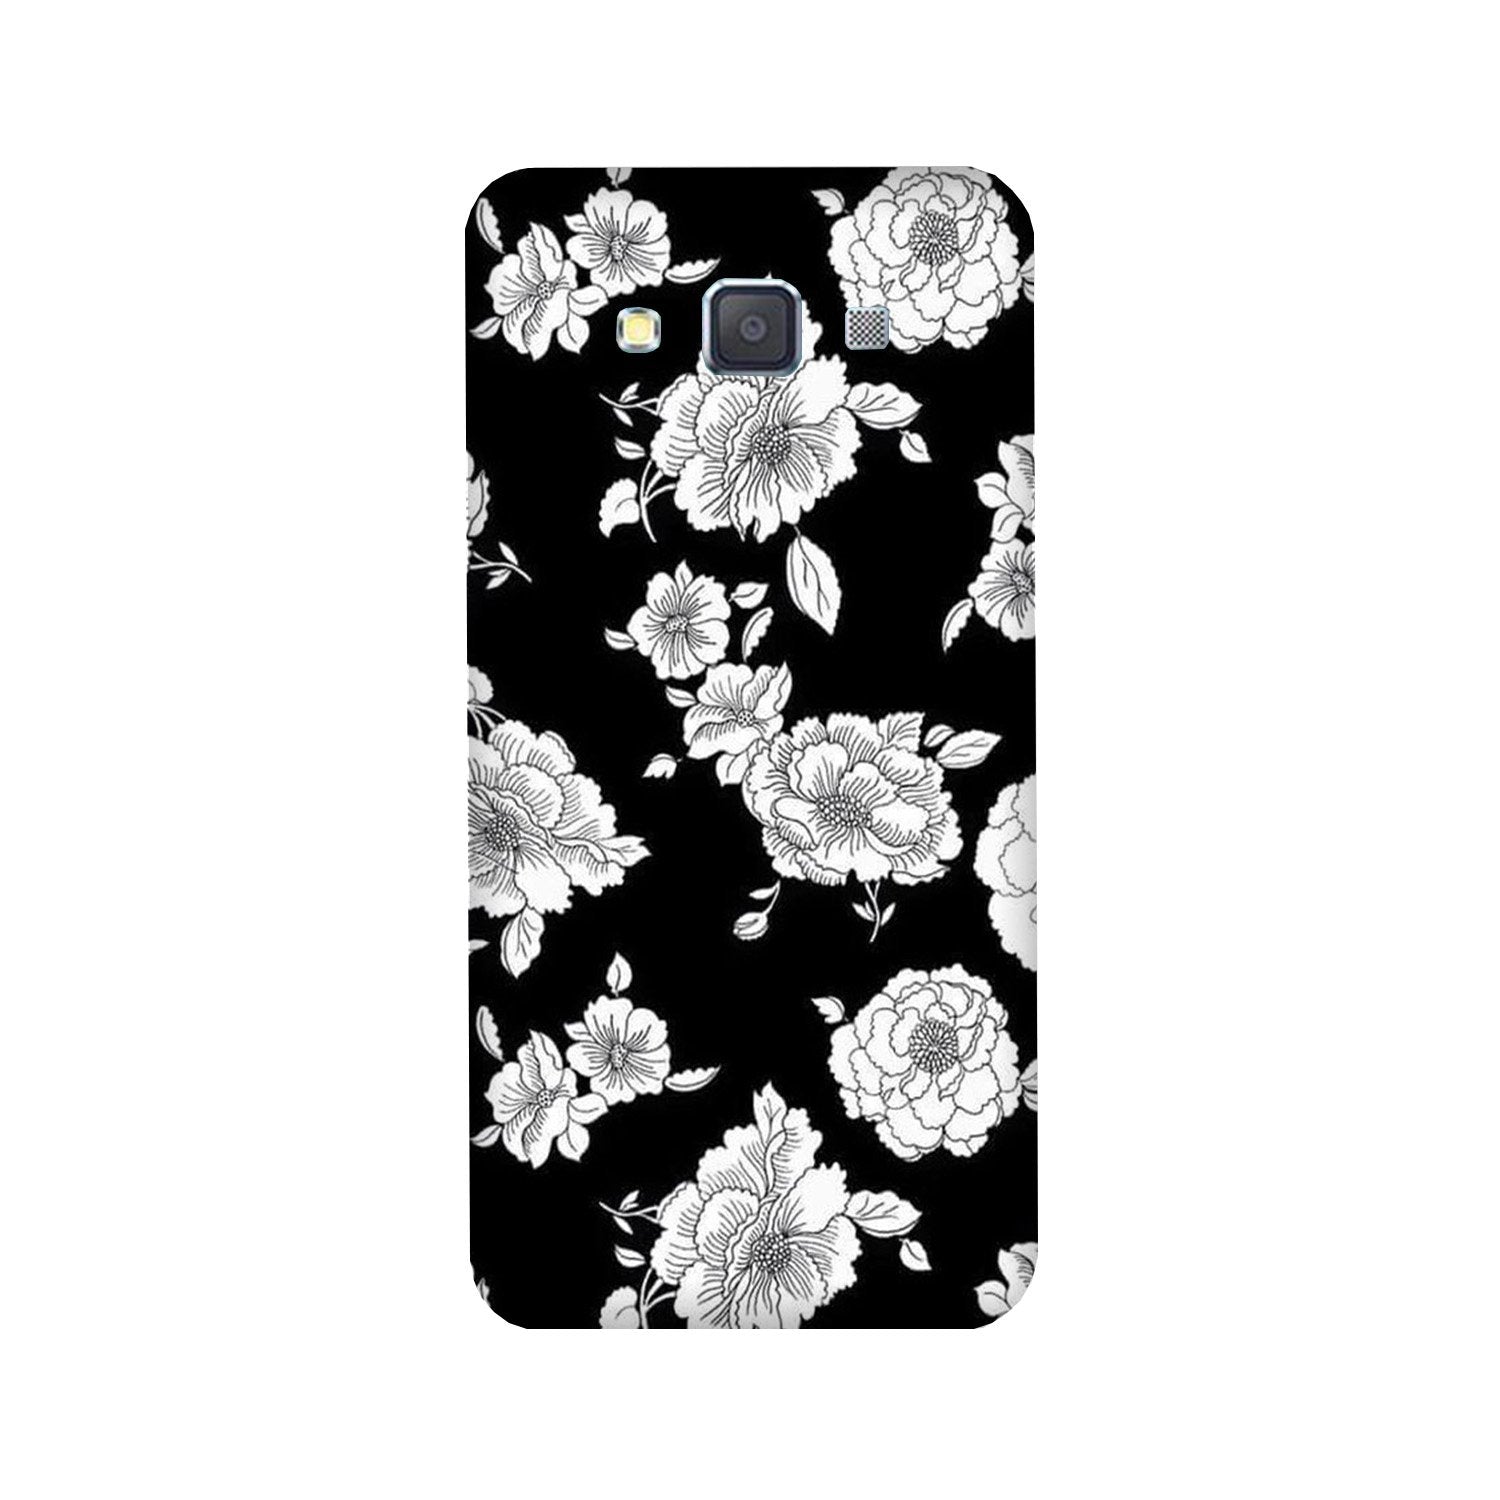 White flowers Black Background Case for Galaxy Grand Max